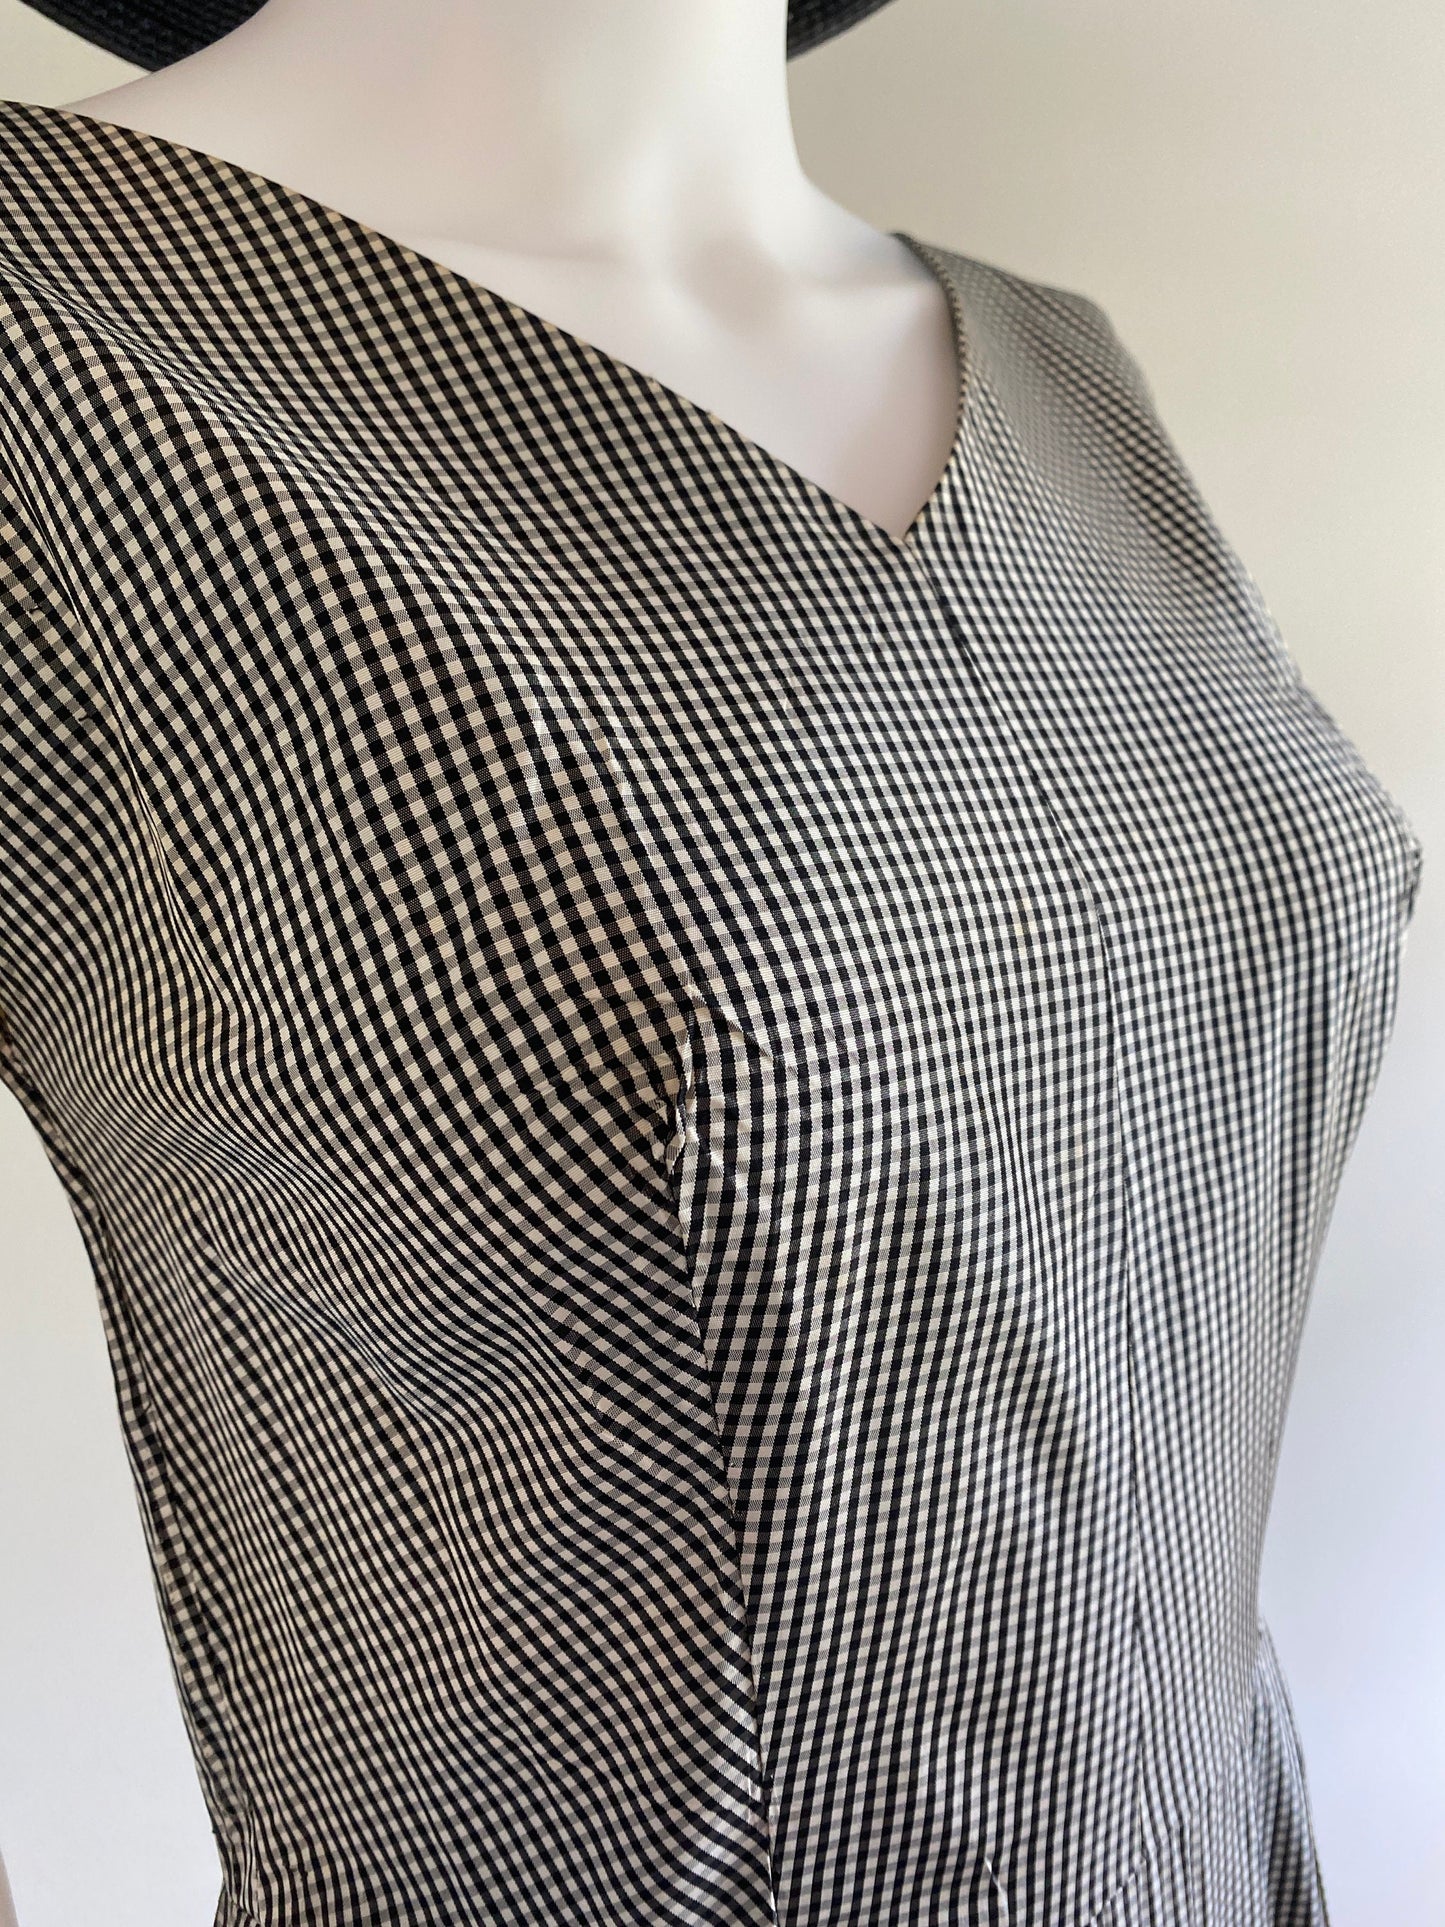 Vintage 1950s Black and White Gingham Plaid Party Dress / 50s Retro Summer Wiggle Dress / Size S M